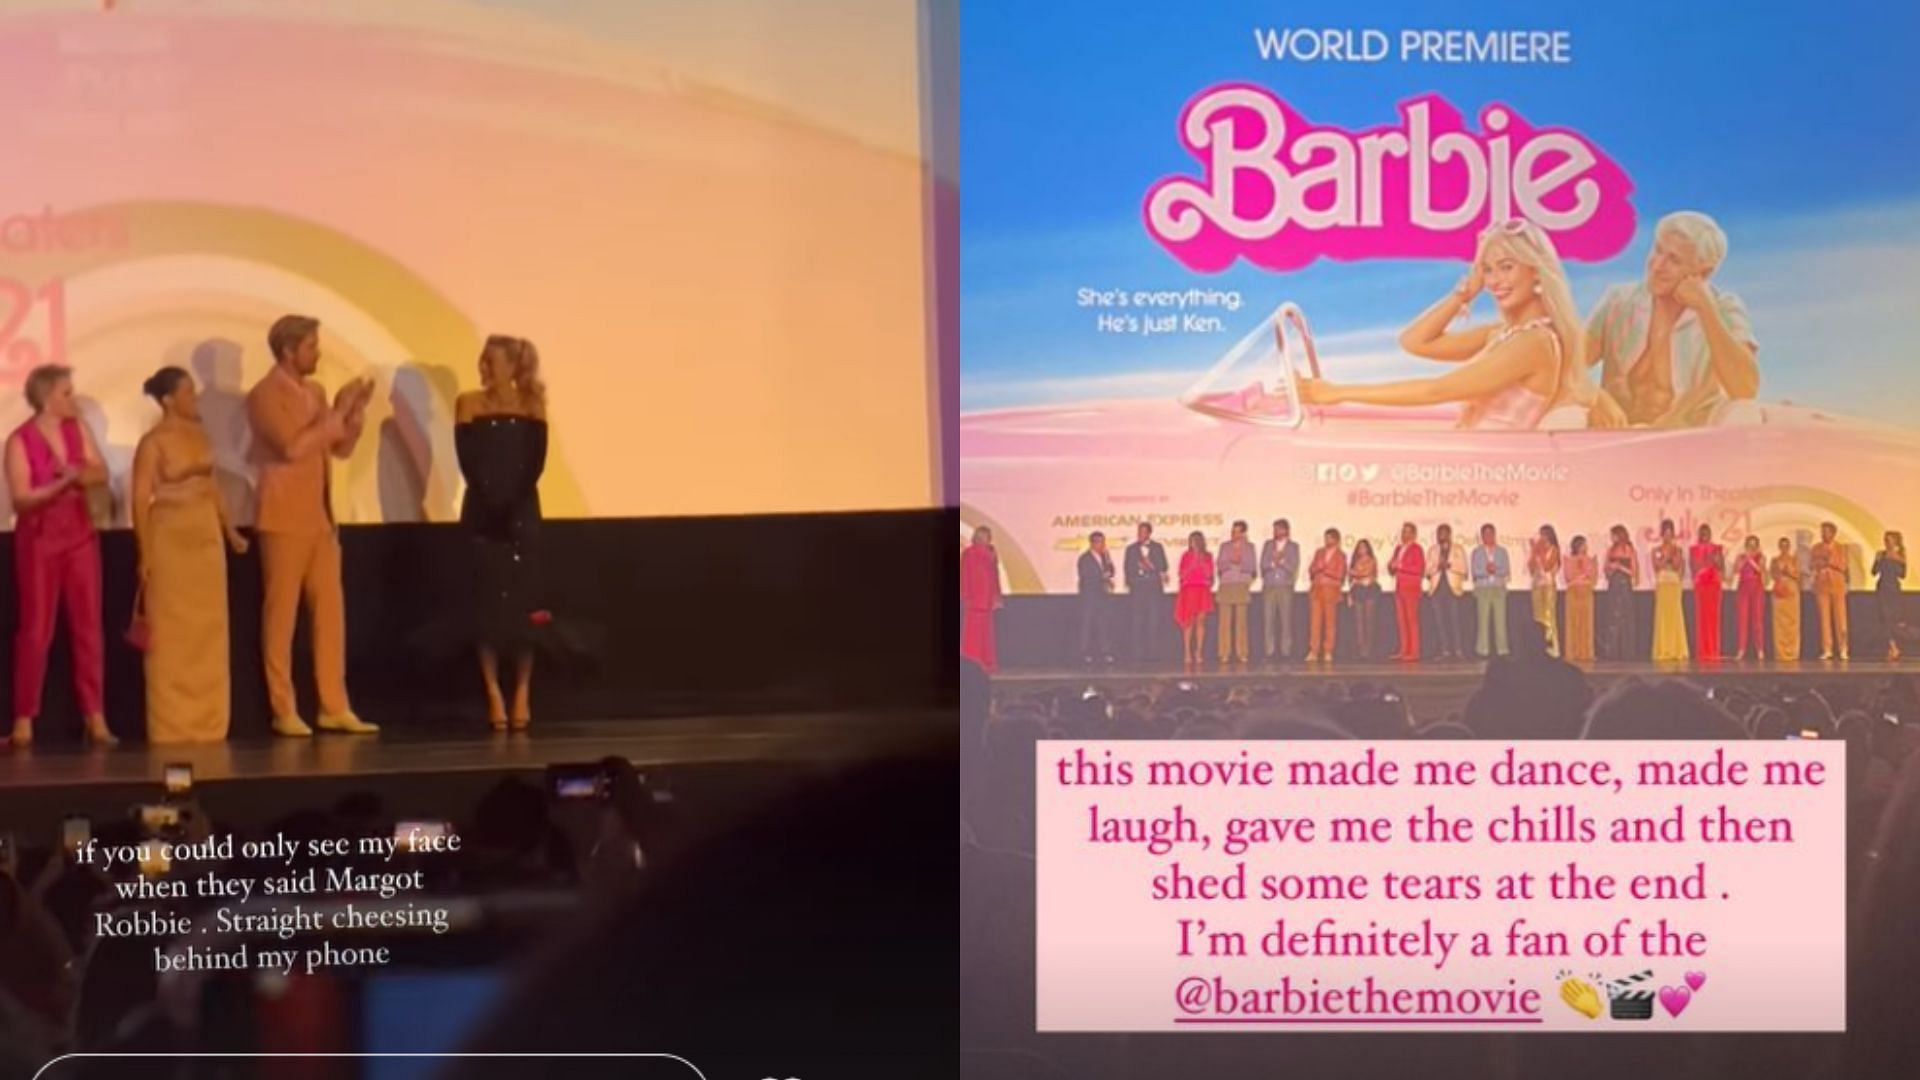 Camille Kostek reviewed &quot;Barbie&quot; movie and fangirled over Margot Robbie (Image Credit: Camille Kostek&#039;s Instagram Story).